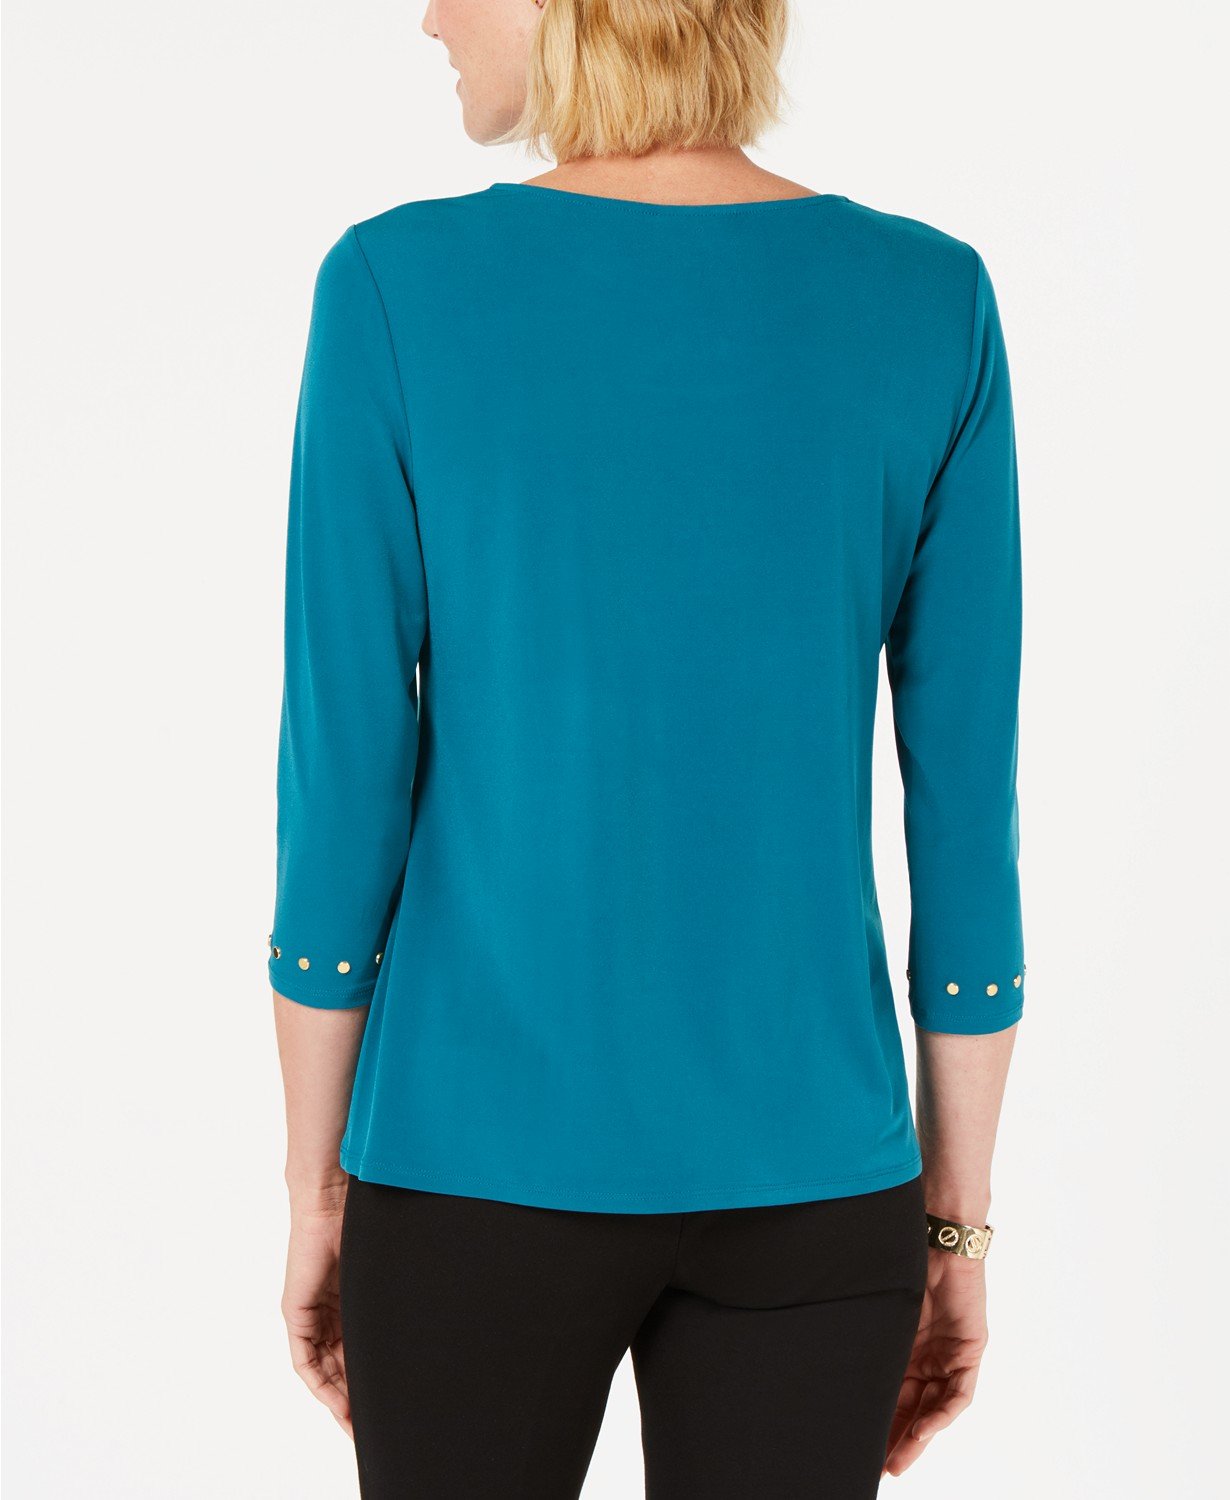 JM Collection Studded Keyhole Top Teal Abyss XL